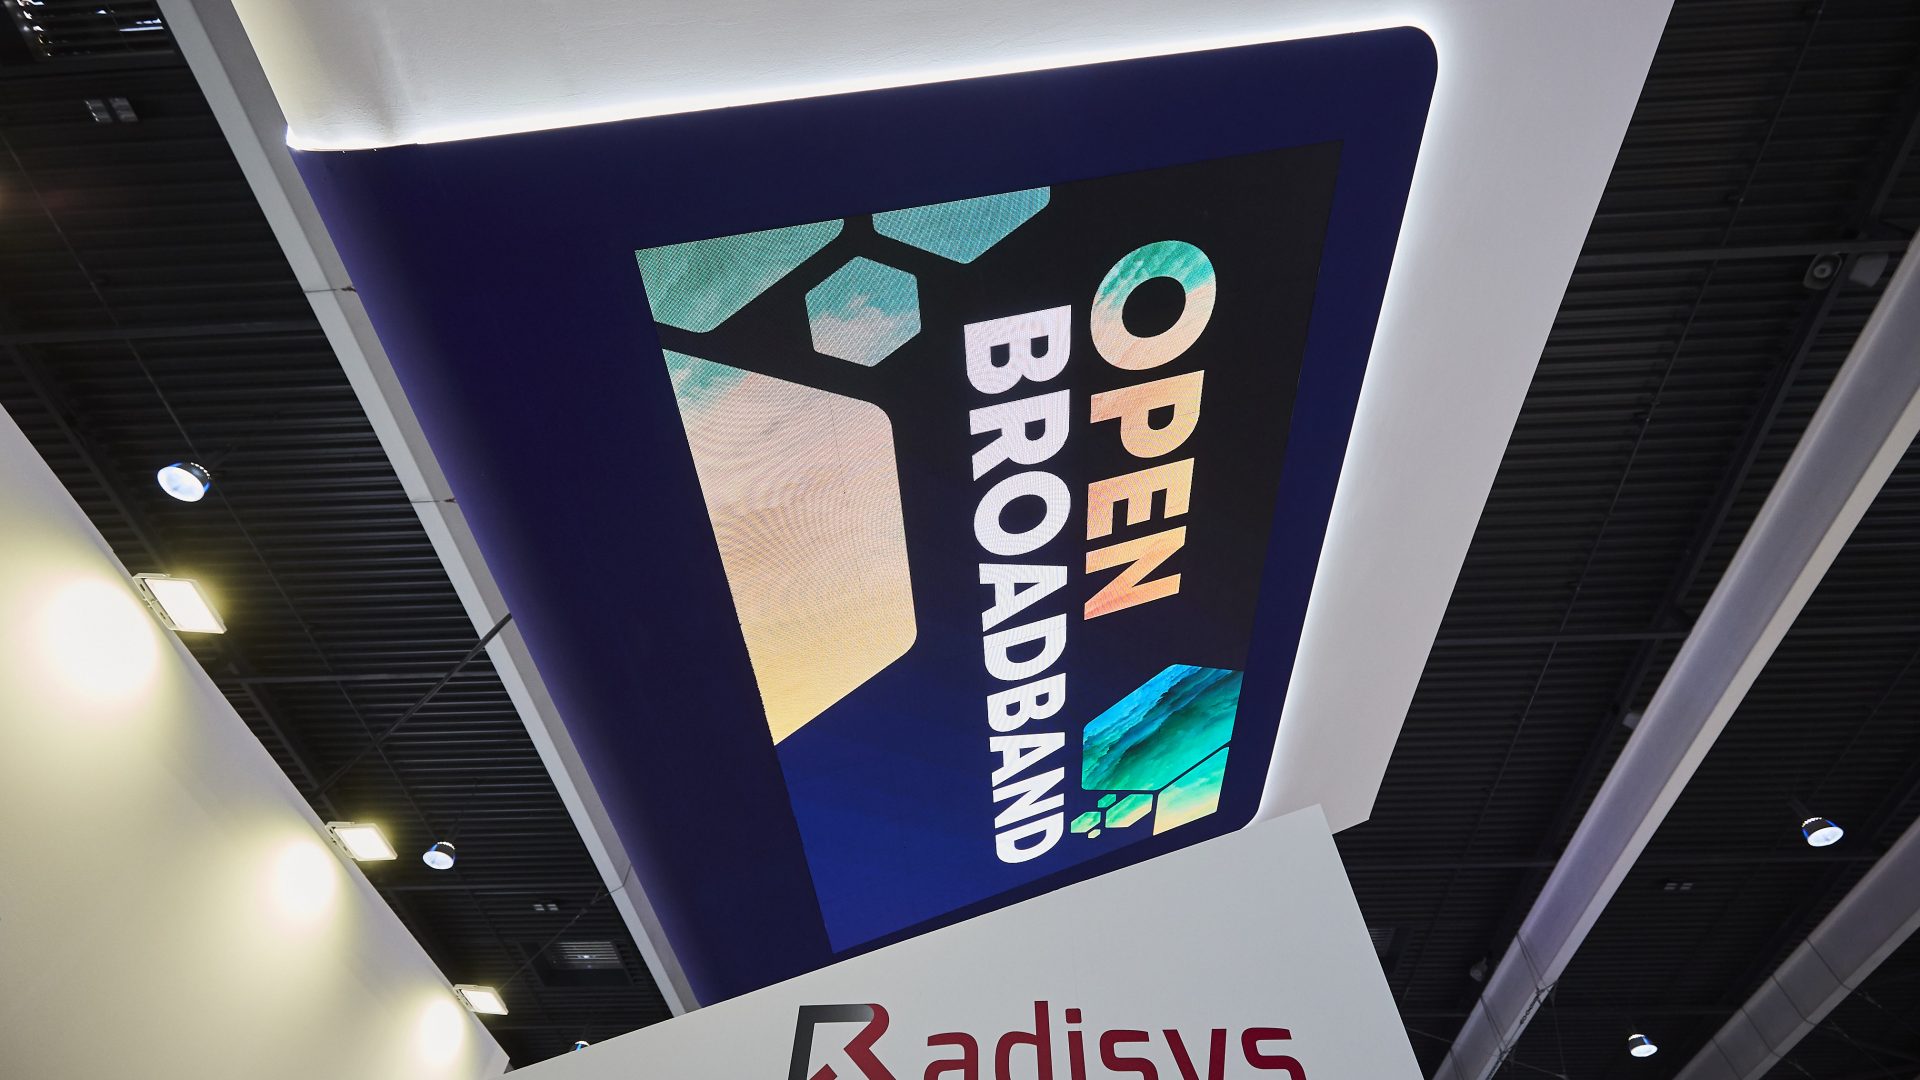 Big, hanging LED screen as eye-catcher of Radisys booth at MWC 2019